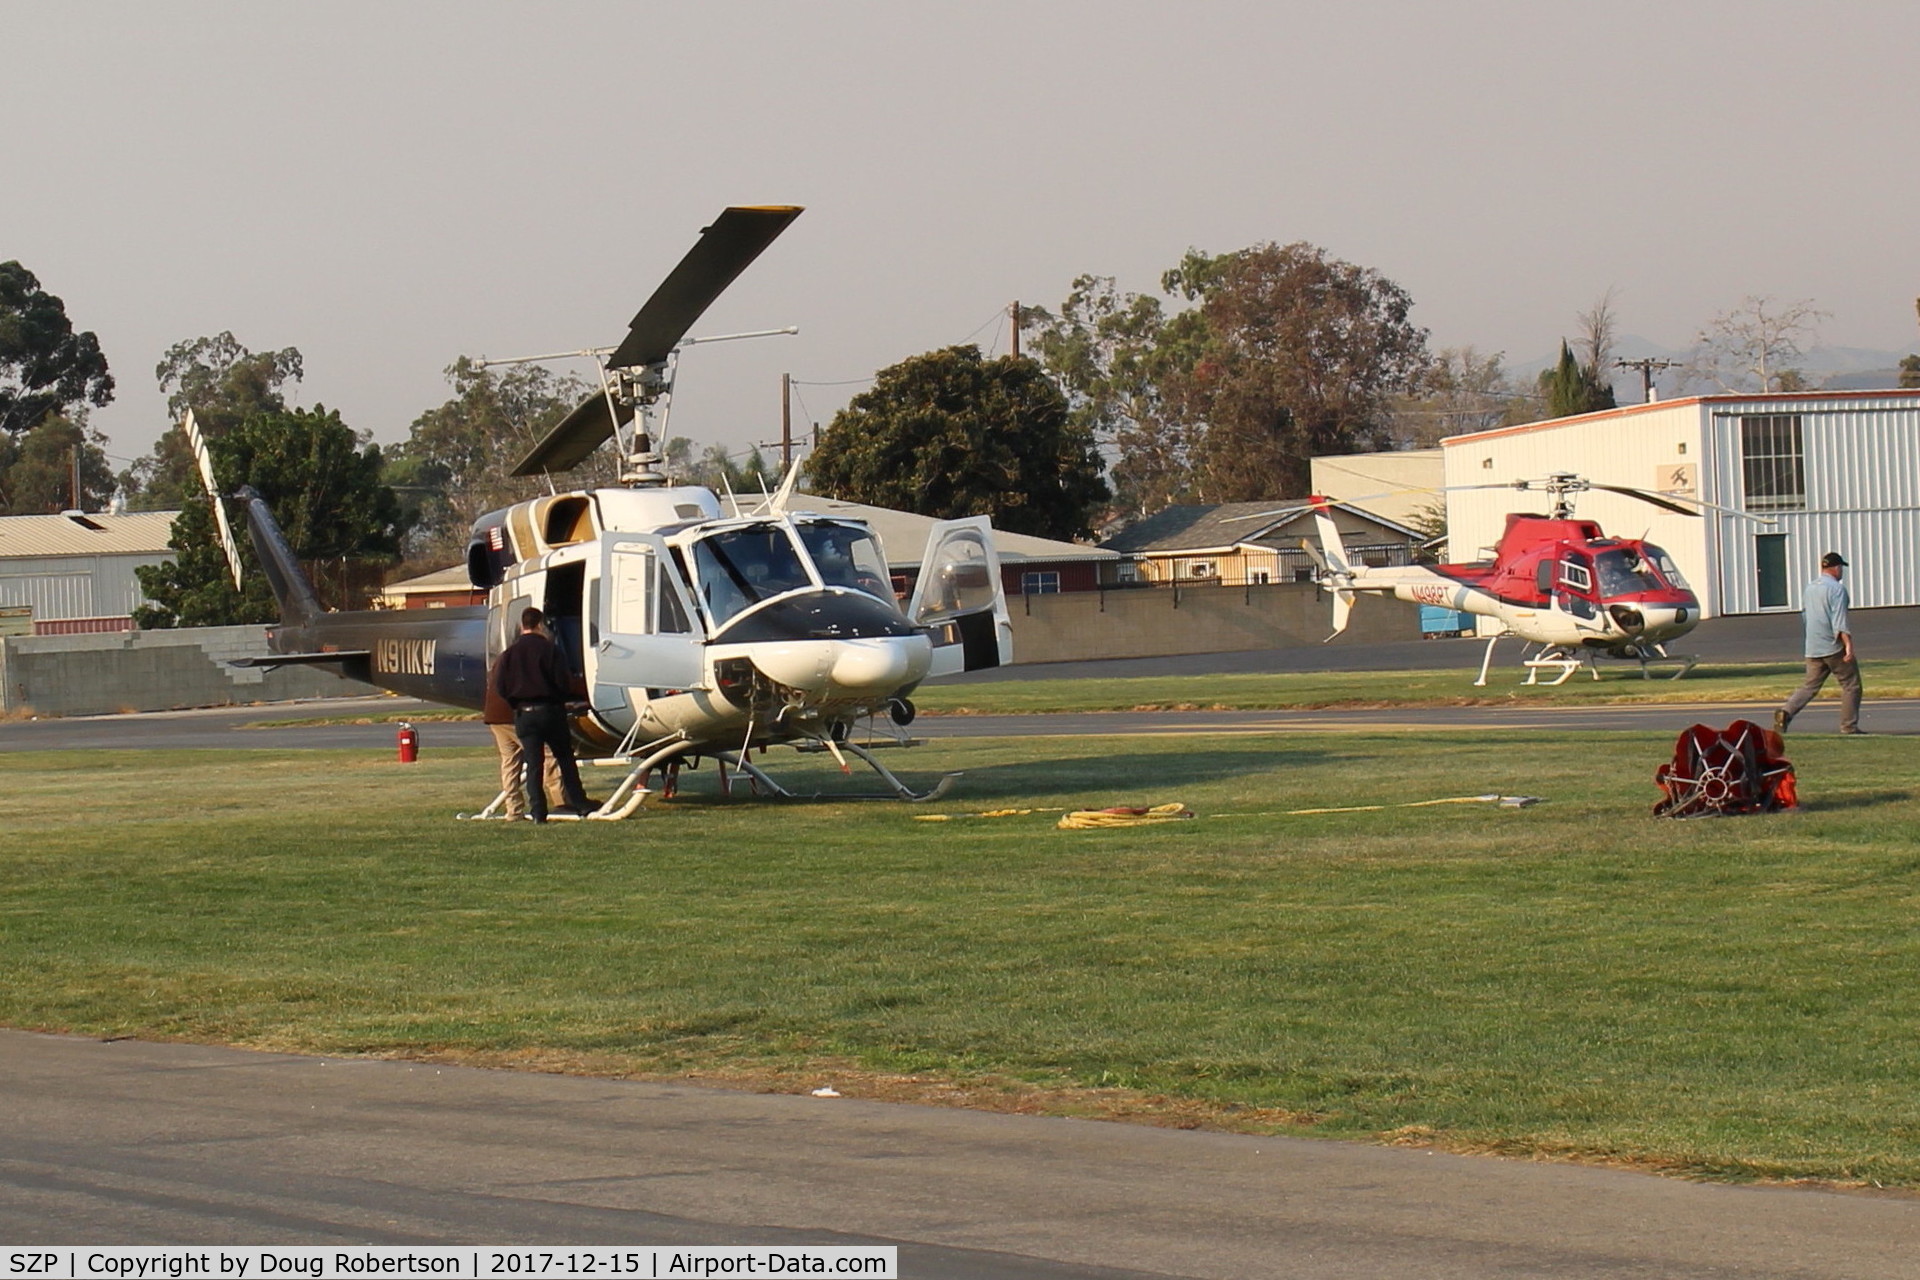 Santa Paula Airport (SZP) - N911KW 1973 Bell 212 TWIN TWO-TWELVE, P&W PT6 series Turbo TWIN-PAC derated to 1,290 SHp, Restricted, Forest registry, at SZP Fire Base